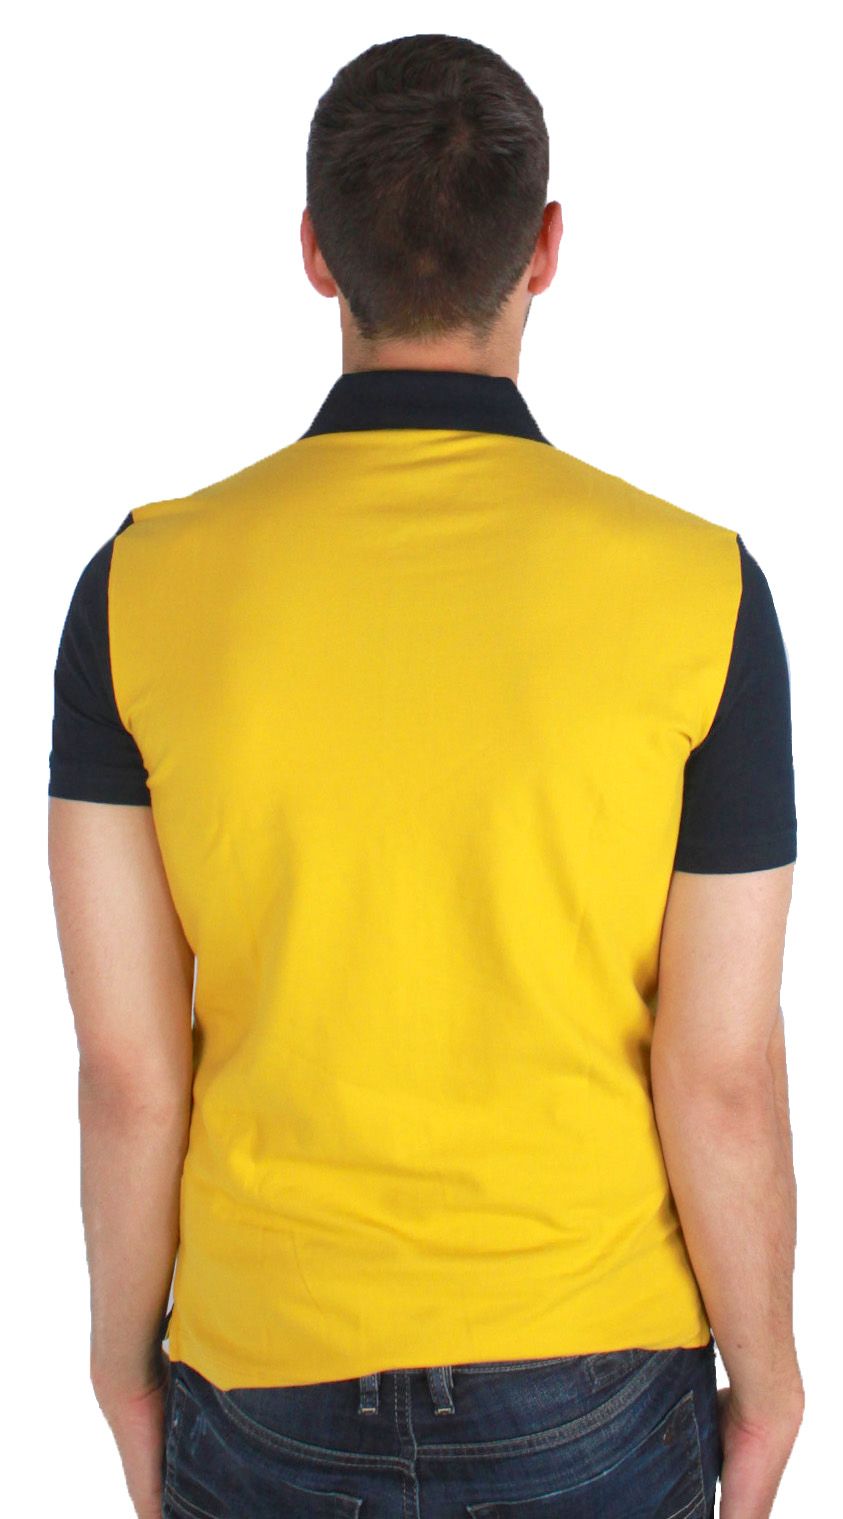 Armani Jeans 6Y6F24 6JPTZ 1579 Polo Shirt. Short Sleeved Navy Blue Armani Polo Shirt. Navy on Front, Yellow on Back. 96% Cotton, 4% Elastane. Armani Jeans Collection By Giorgio Armani. Code: 6Y6F24 6JPTZ 1579